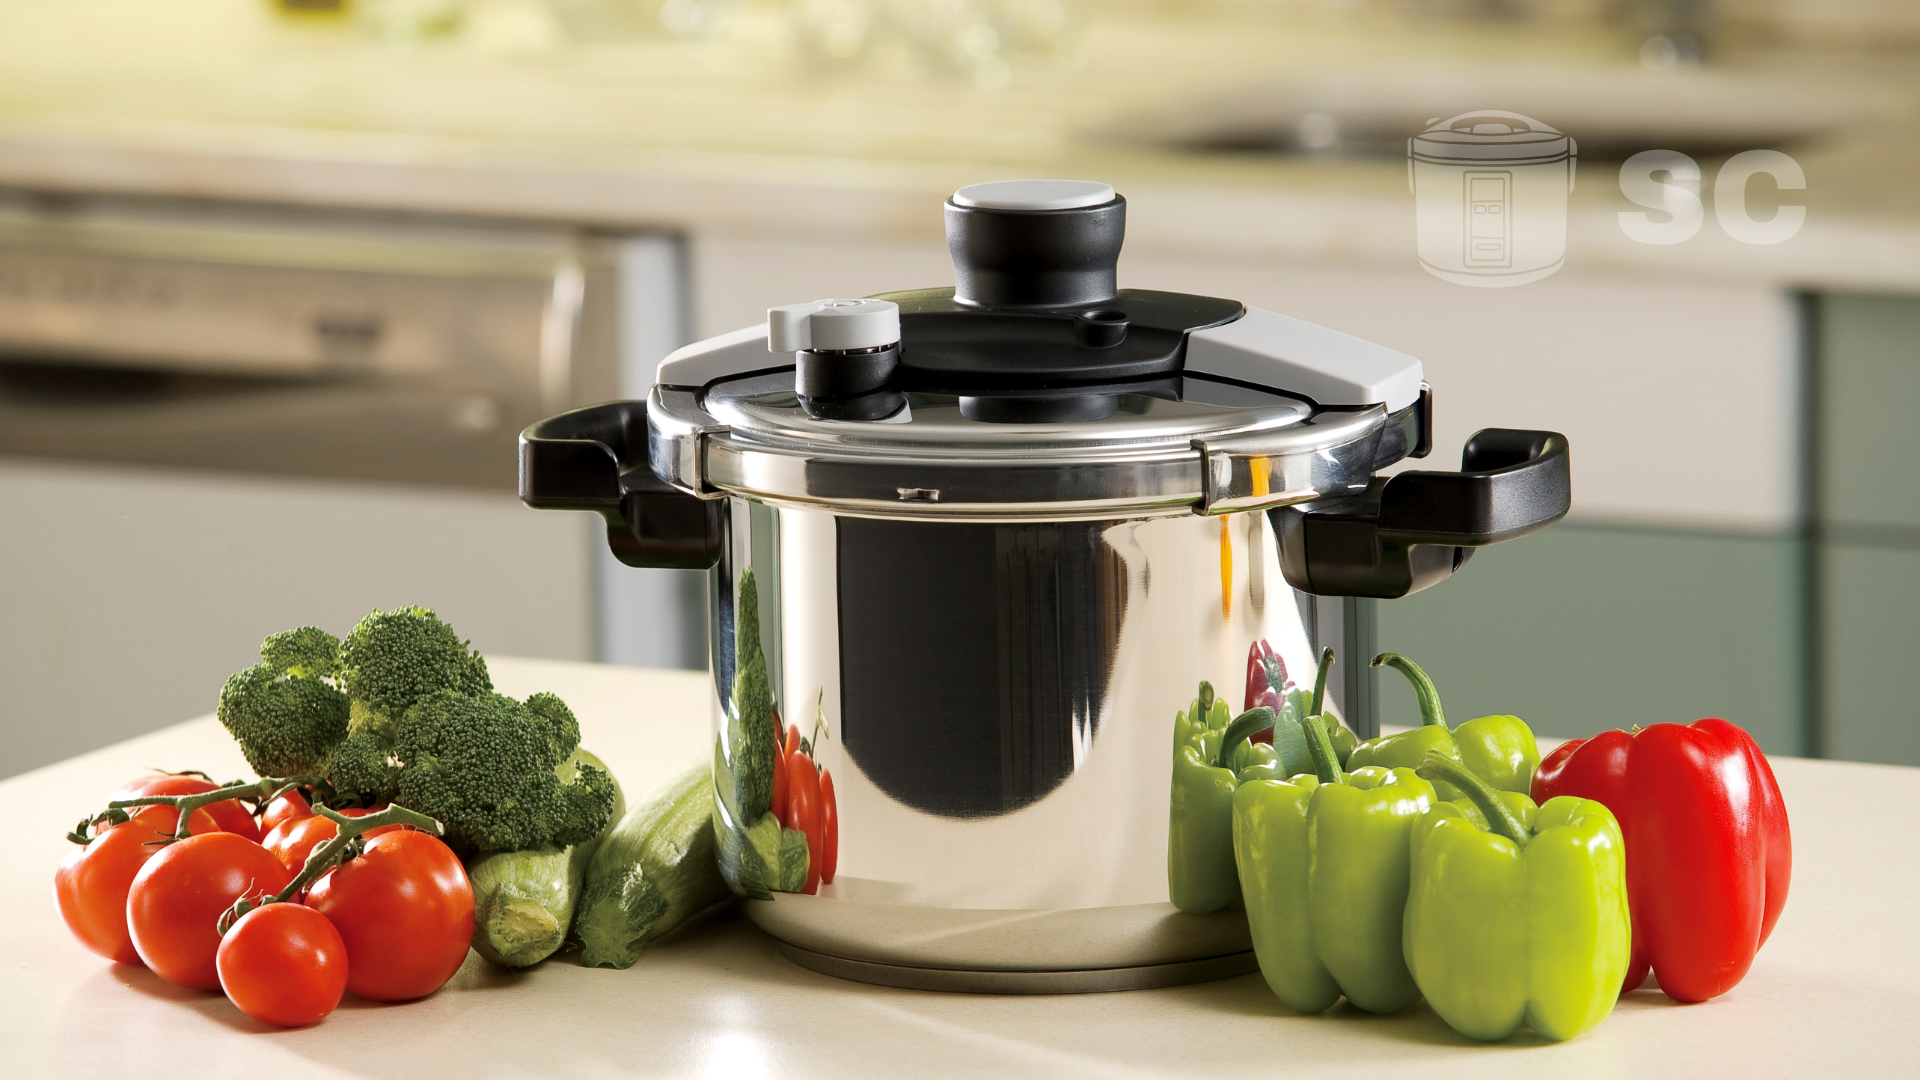 Small Cooker (Featured Image - Pressure Cooker) 1200px x 800px